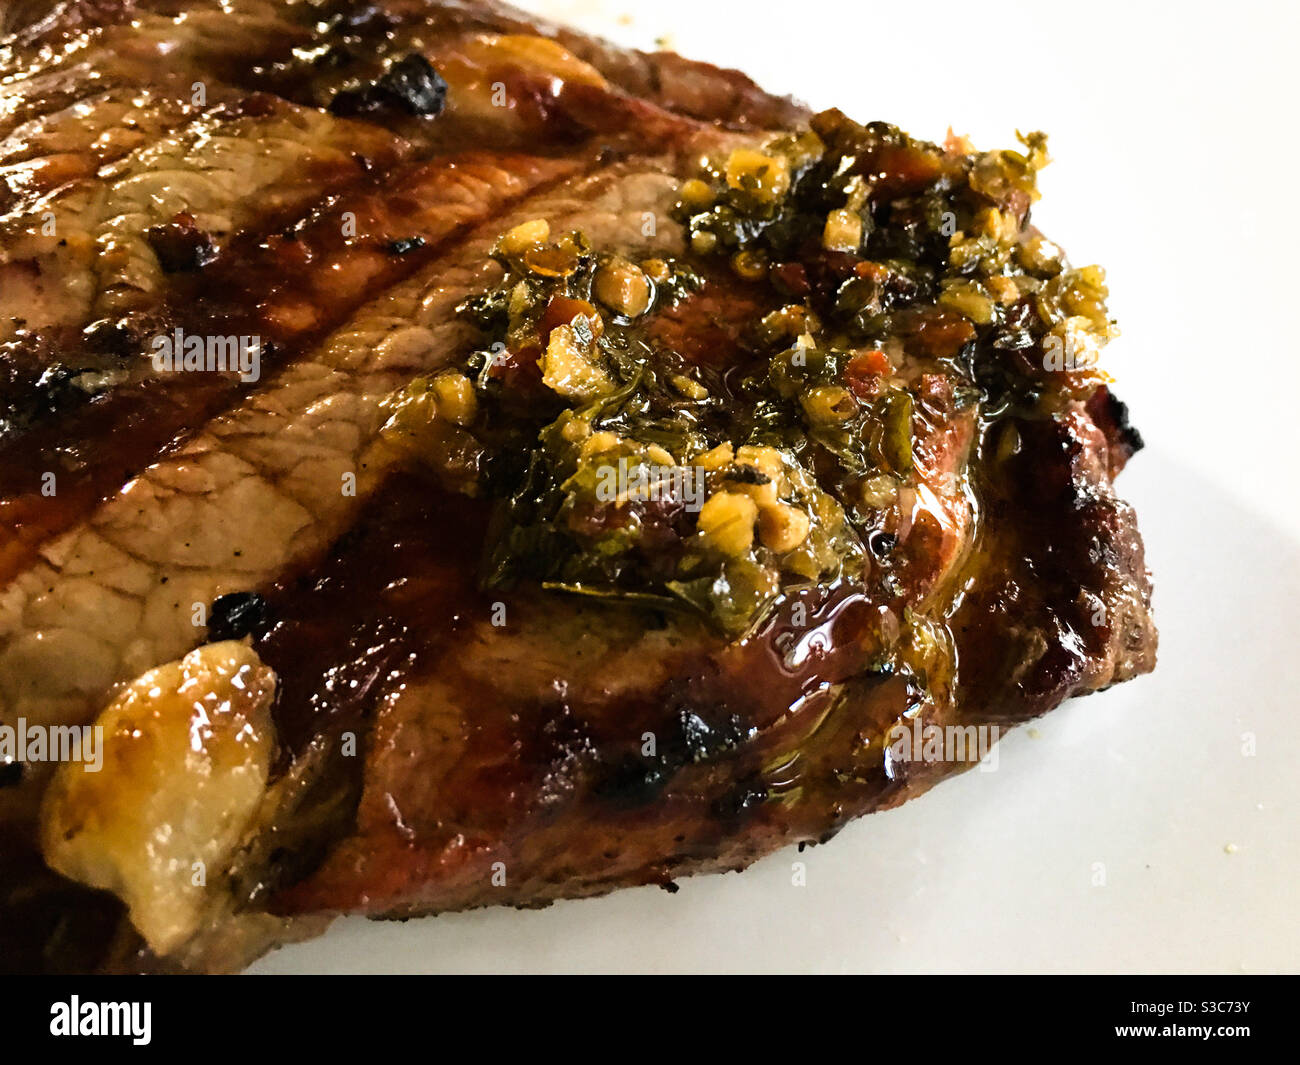 A steak with chimichuri sauce Stock Photo